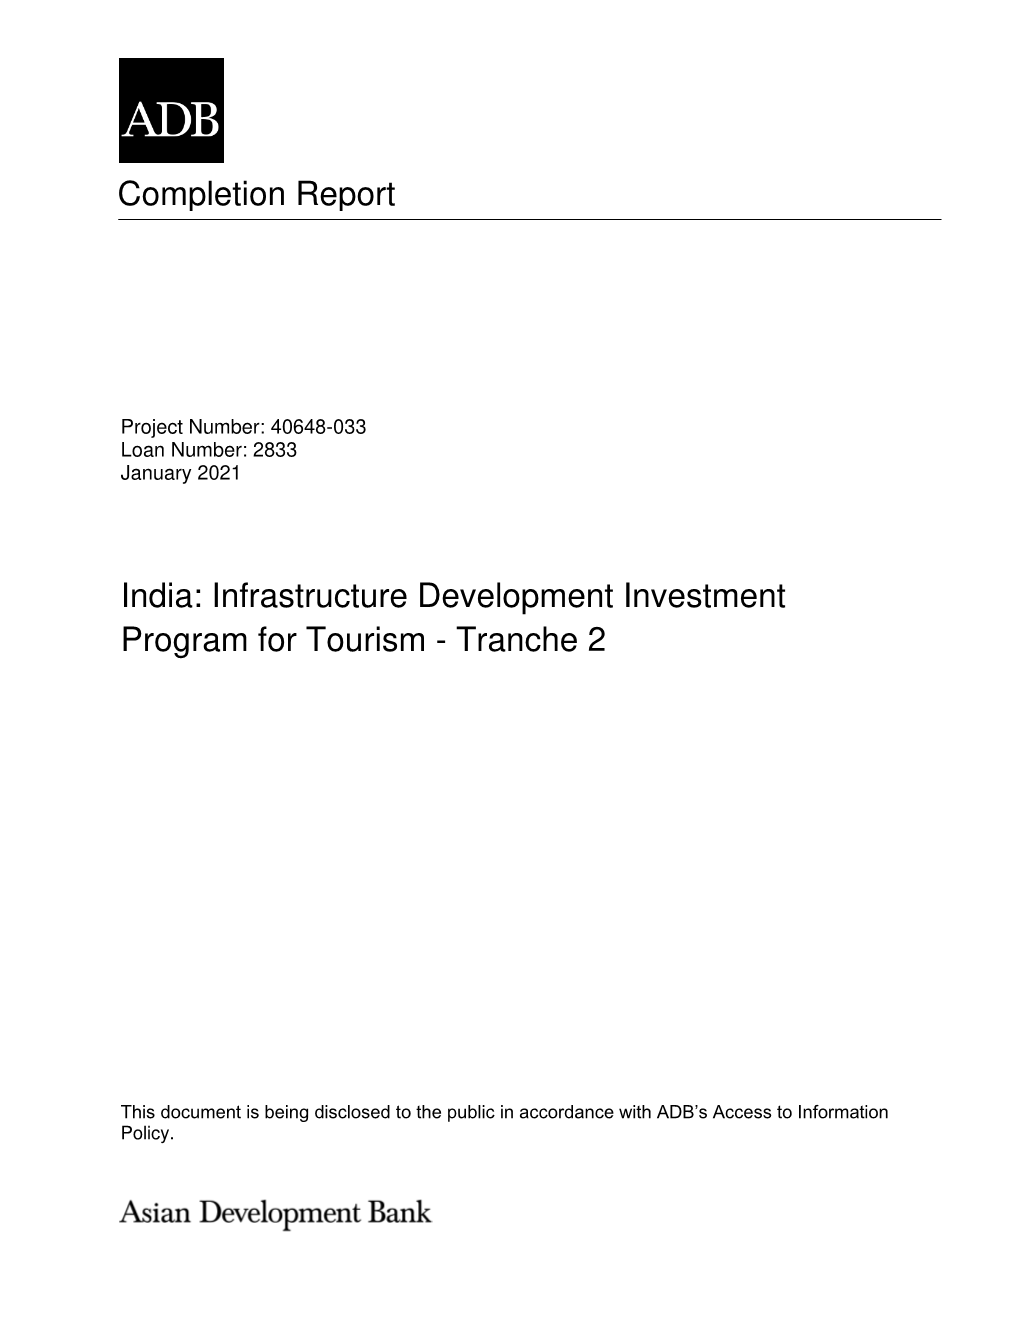 Infrastructure Development Investment Program for Tourism - Tranche 2